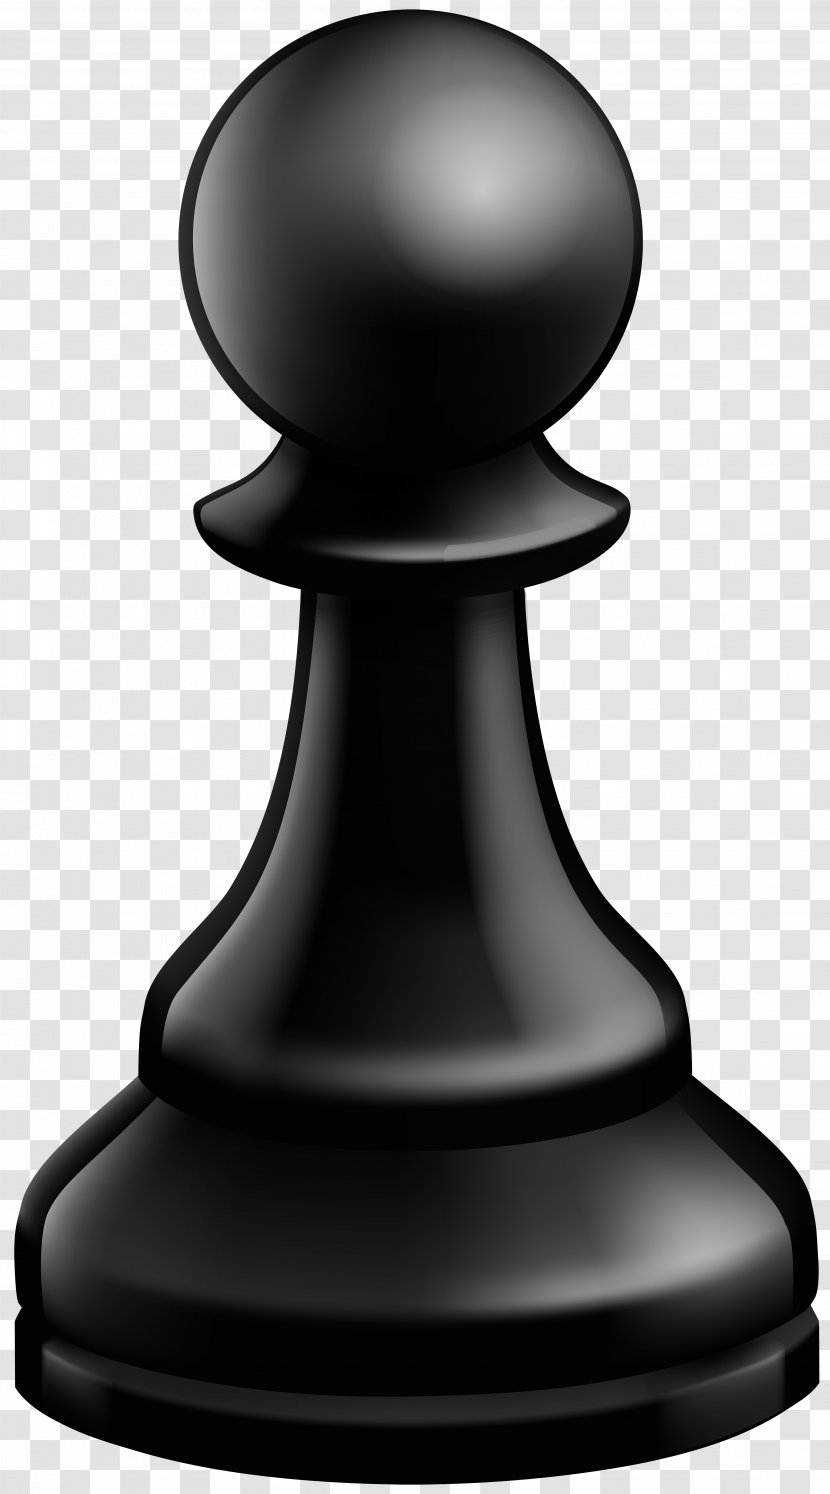 Chess Piece Pawn Clip Art - White And Black In Transparent PNG